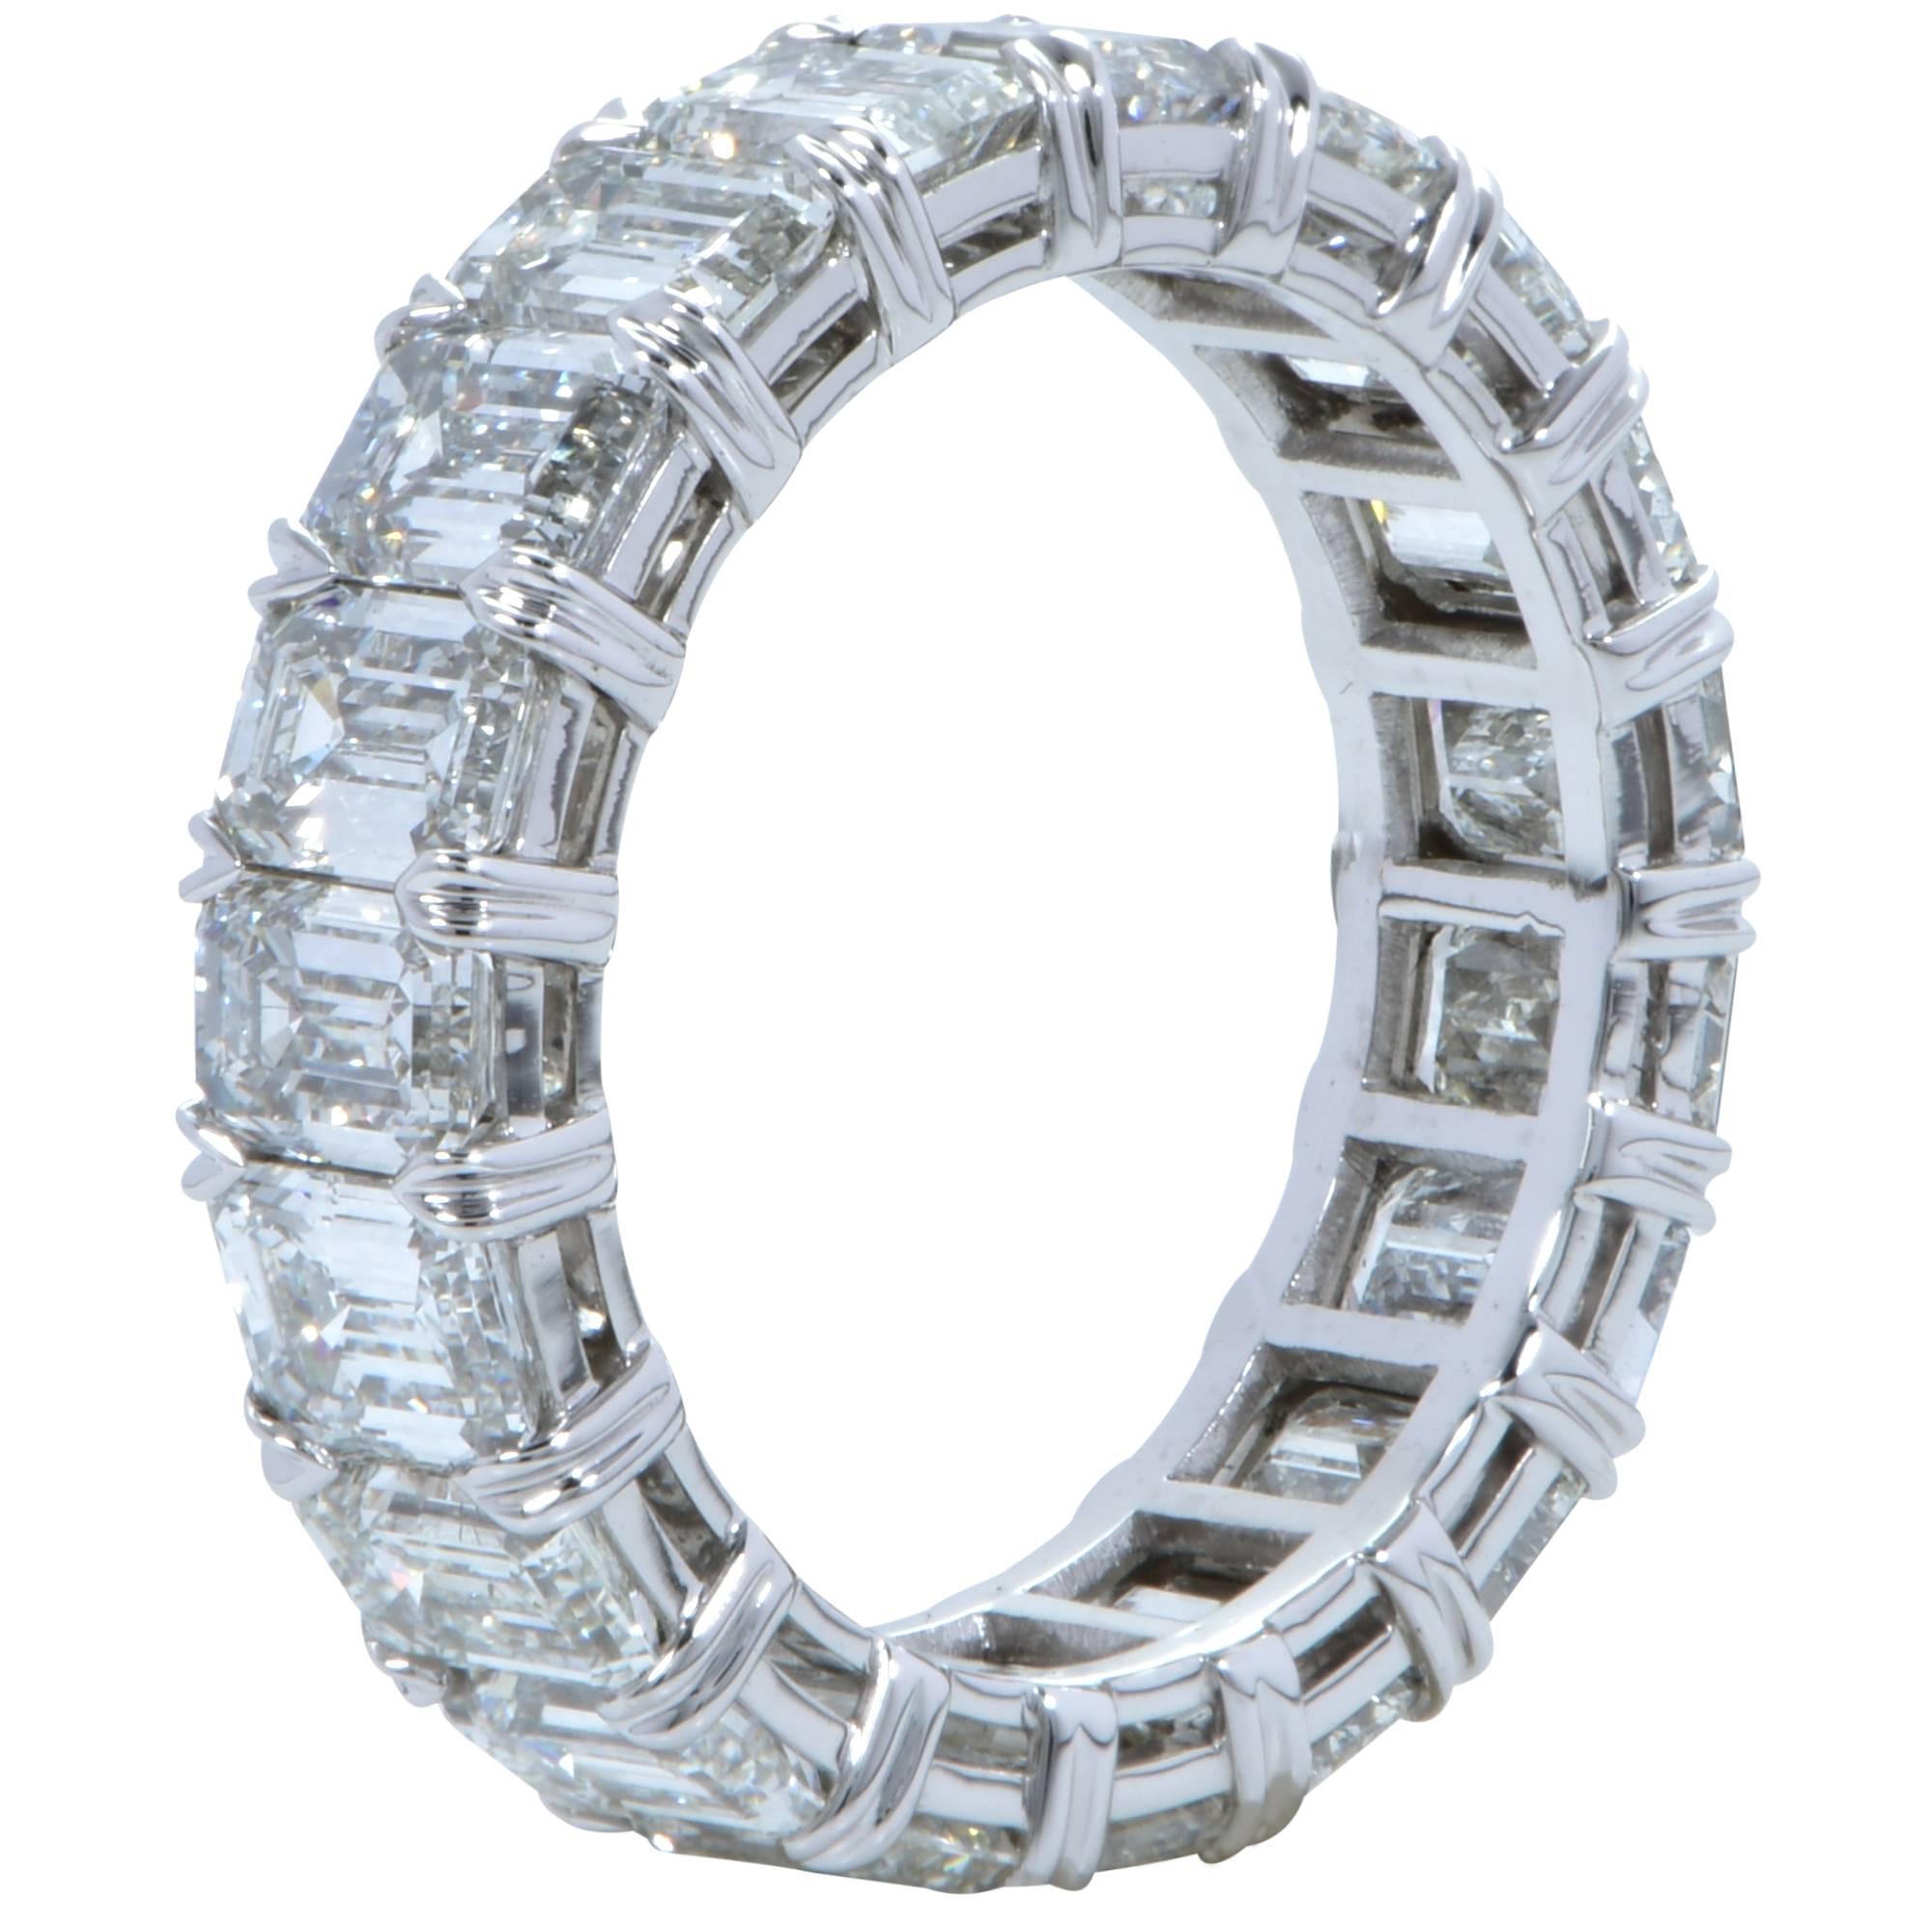 Platinum handmade band size 6. Featuring 19 emerald cut diamonds weighing 6.29cts total G-H color VVS-VS1 clarity. Size 6

Our pieces are all accompanied by an appraisal performed by one of our in-house GIA Graduates. They are also accompanied by